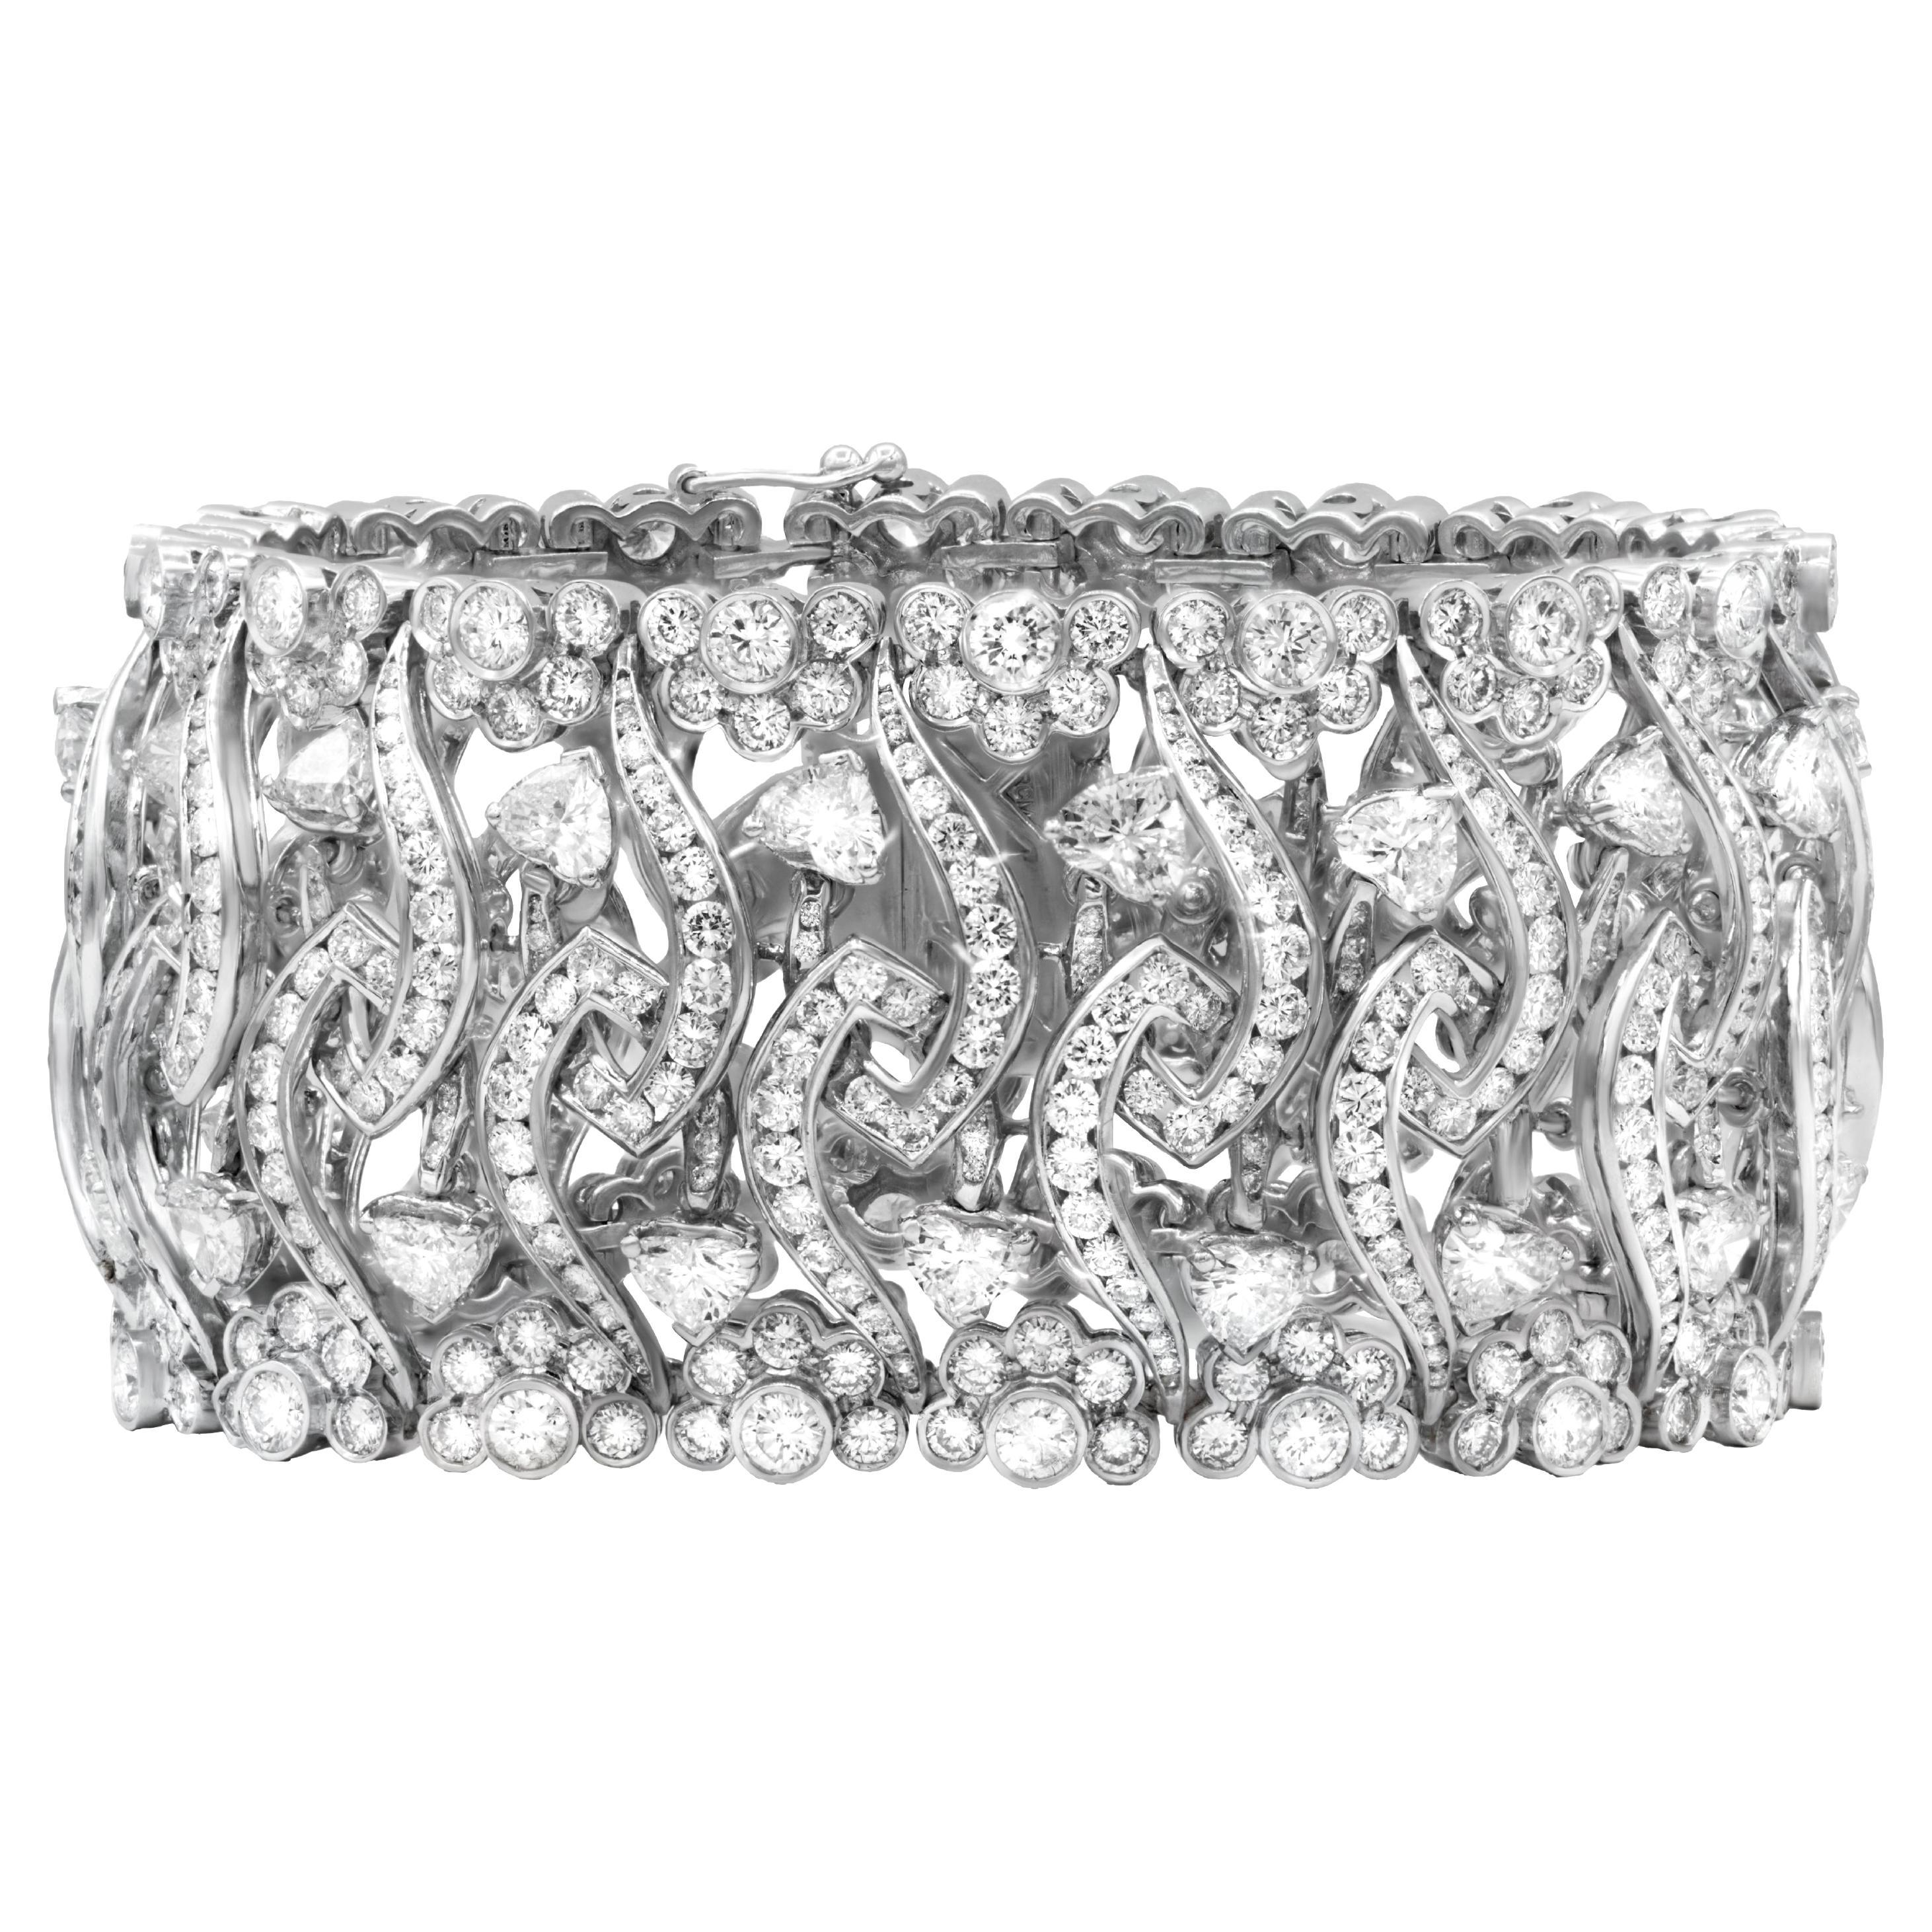 Diana M. 18kt white gold wide, flexible fashion heart bracelet featuring 32.50ct For Sale